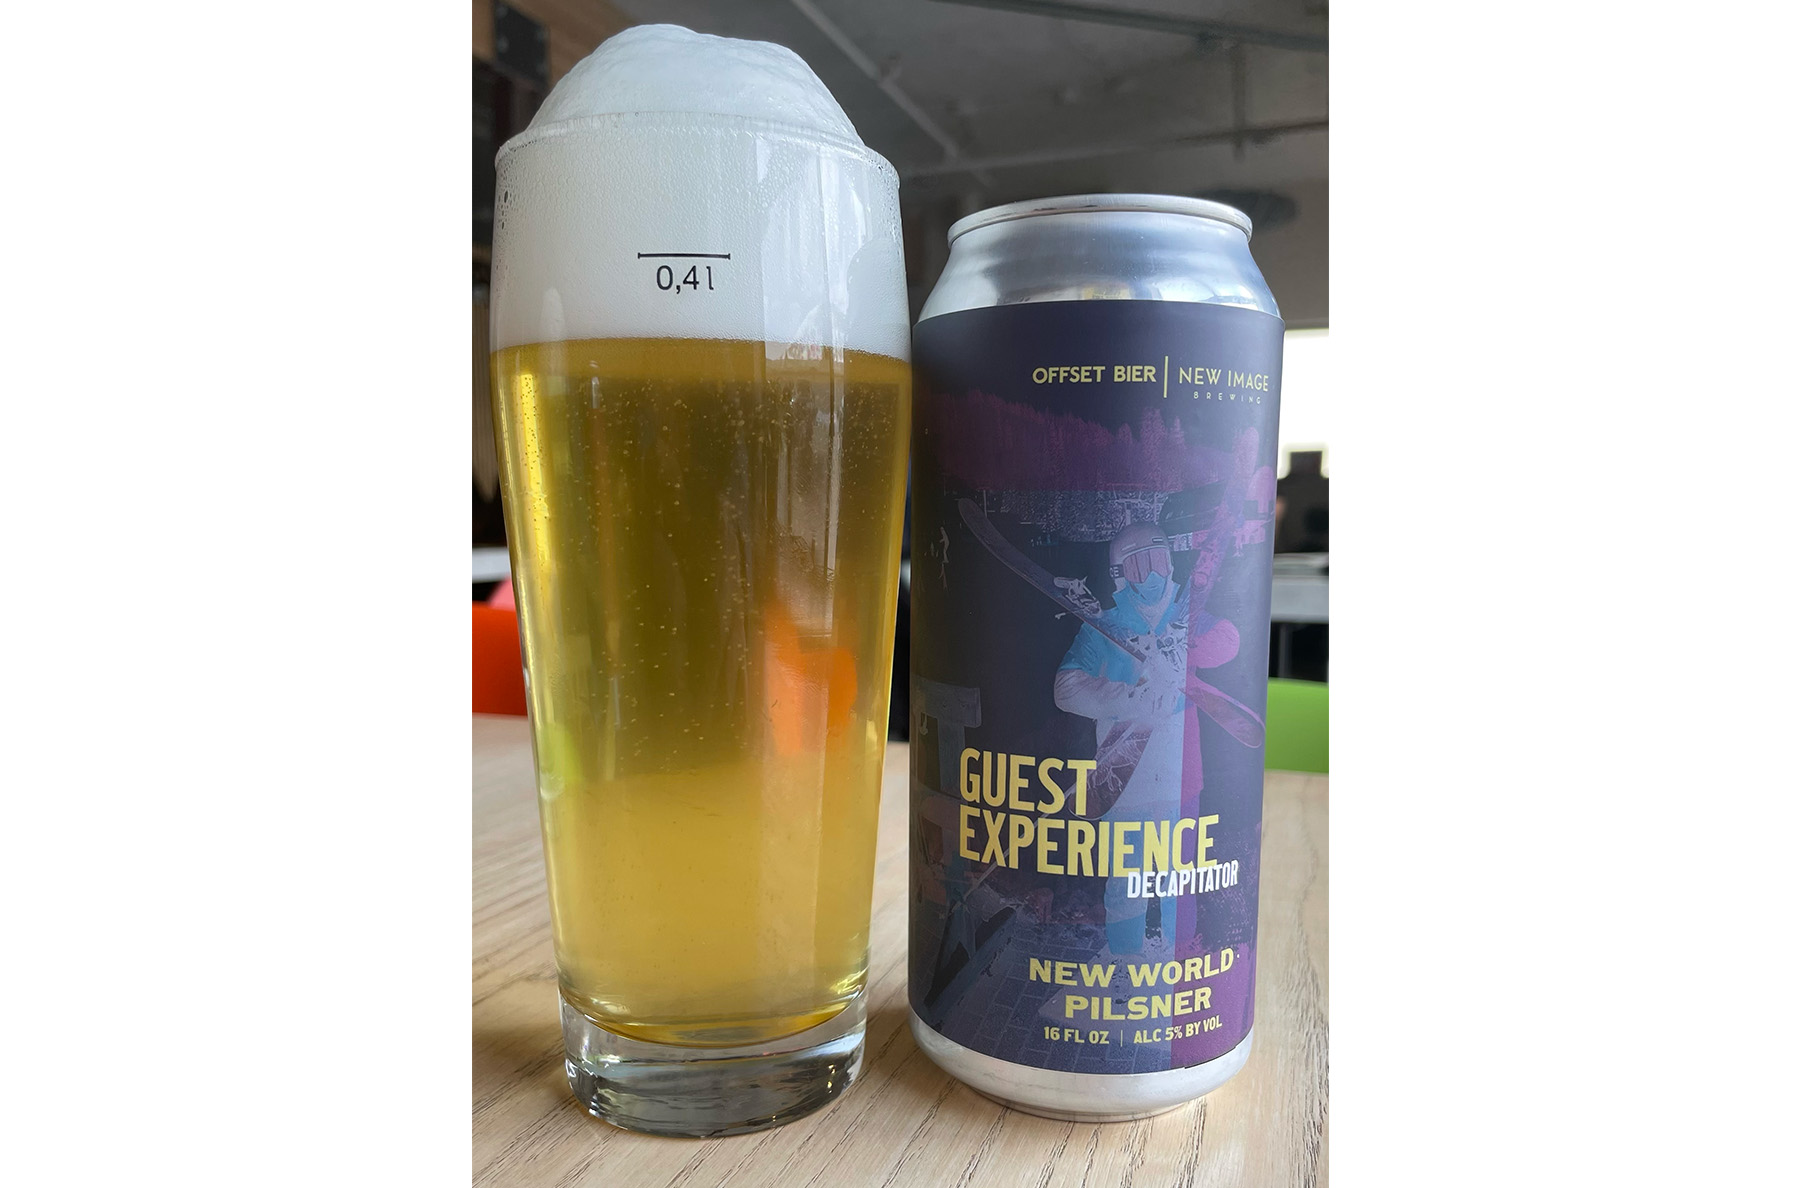 Offset Bier x New Image Brewing: Guest Experience Decapitator